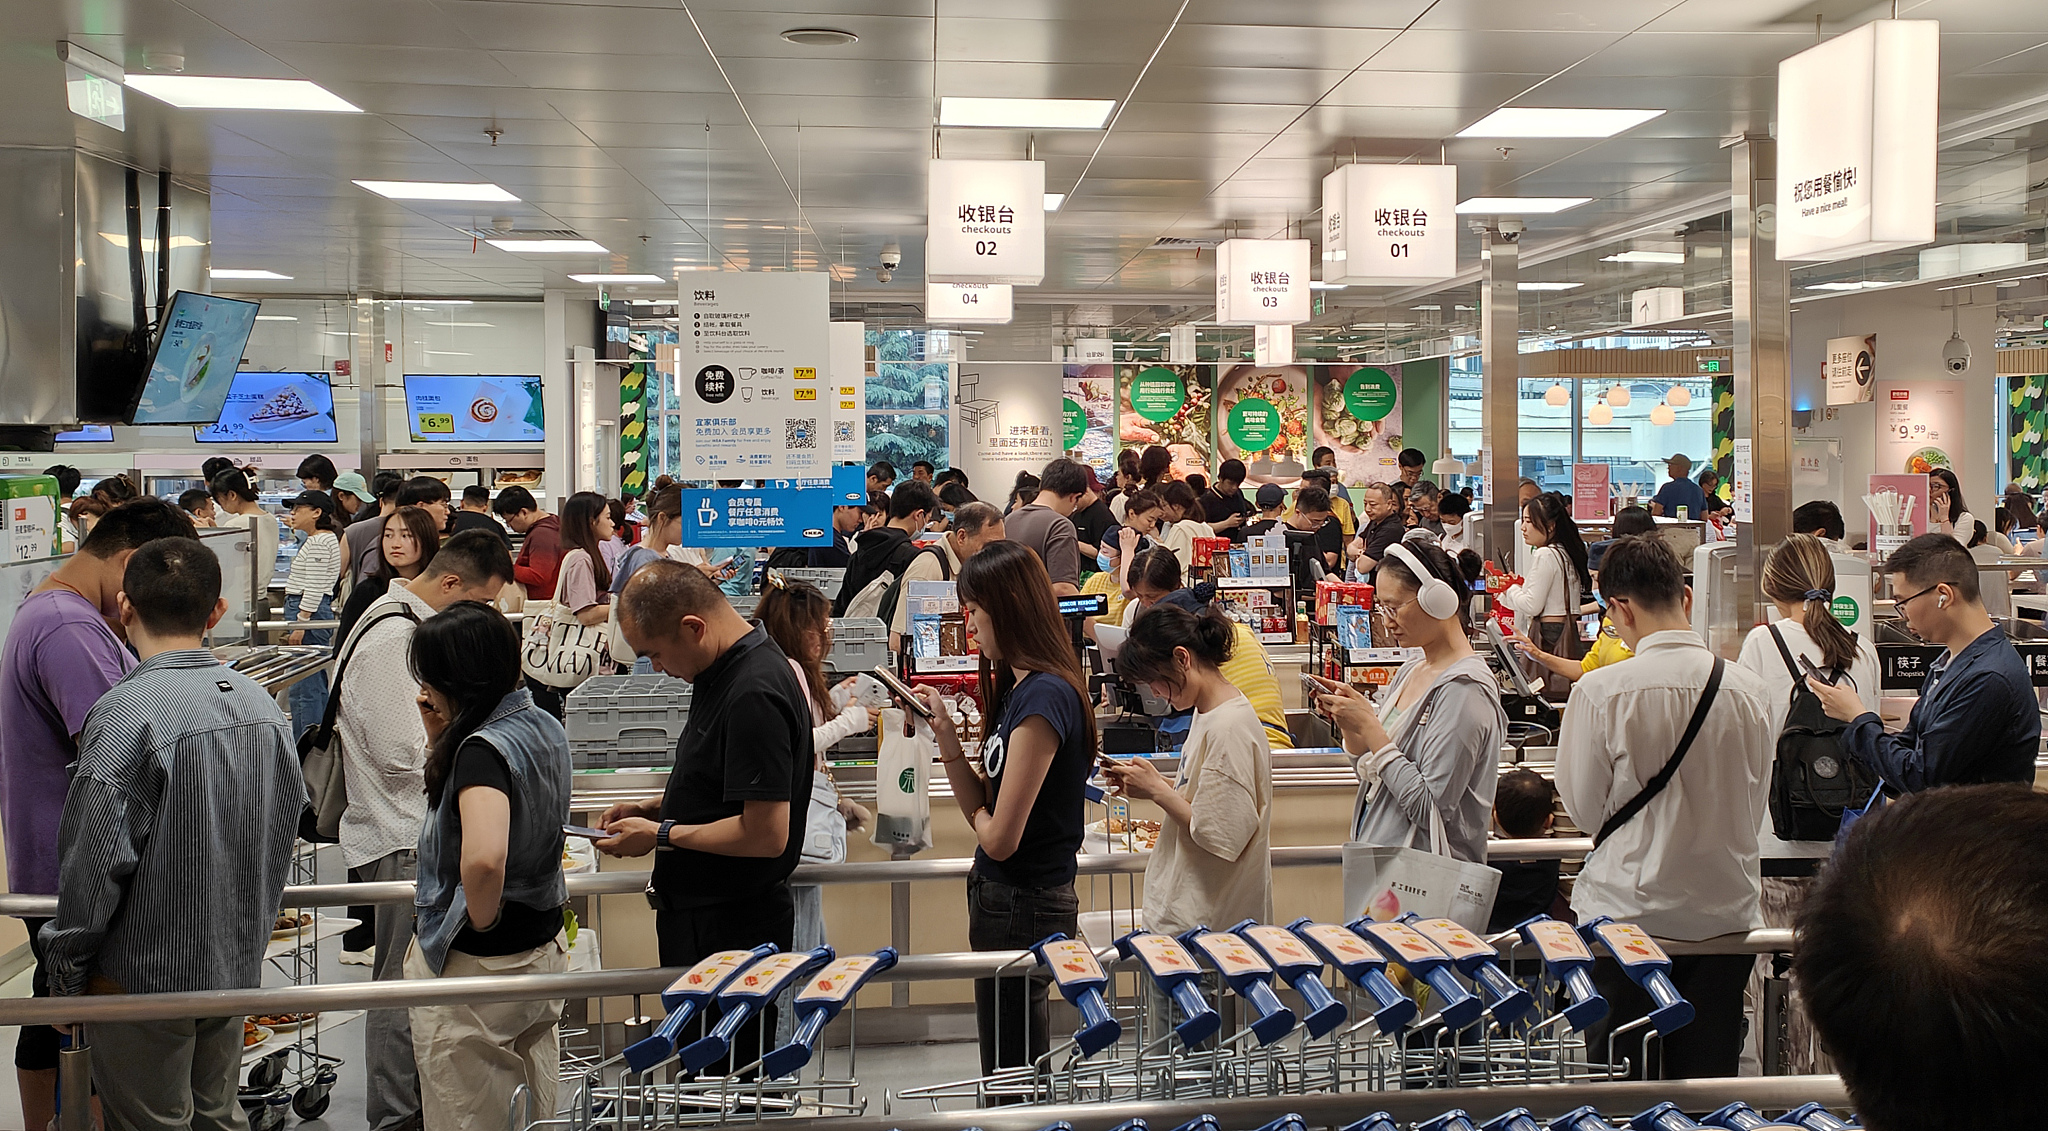 IKEA China's first store held a promotion event for the 